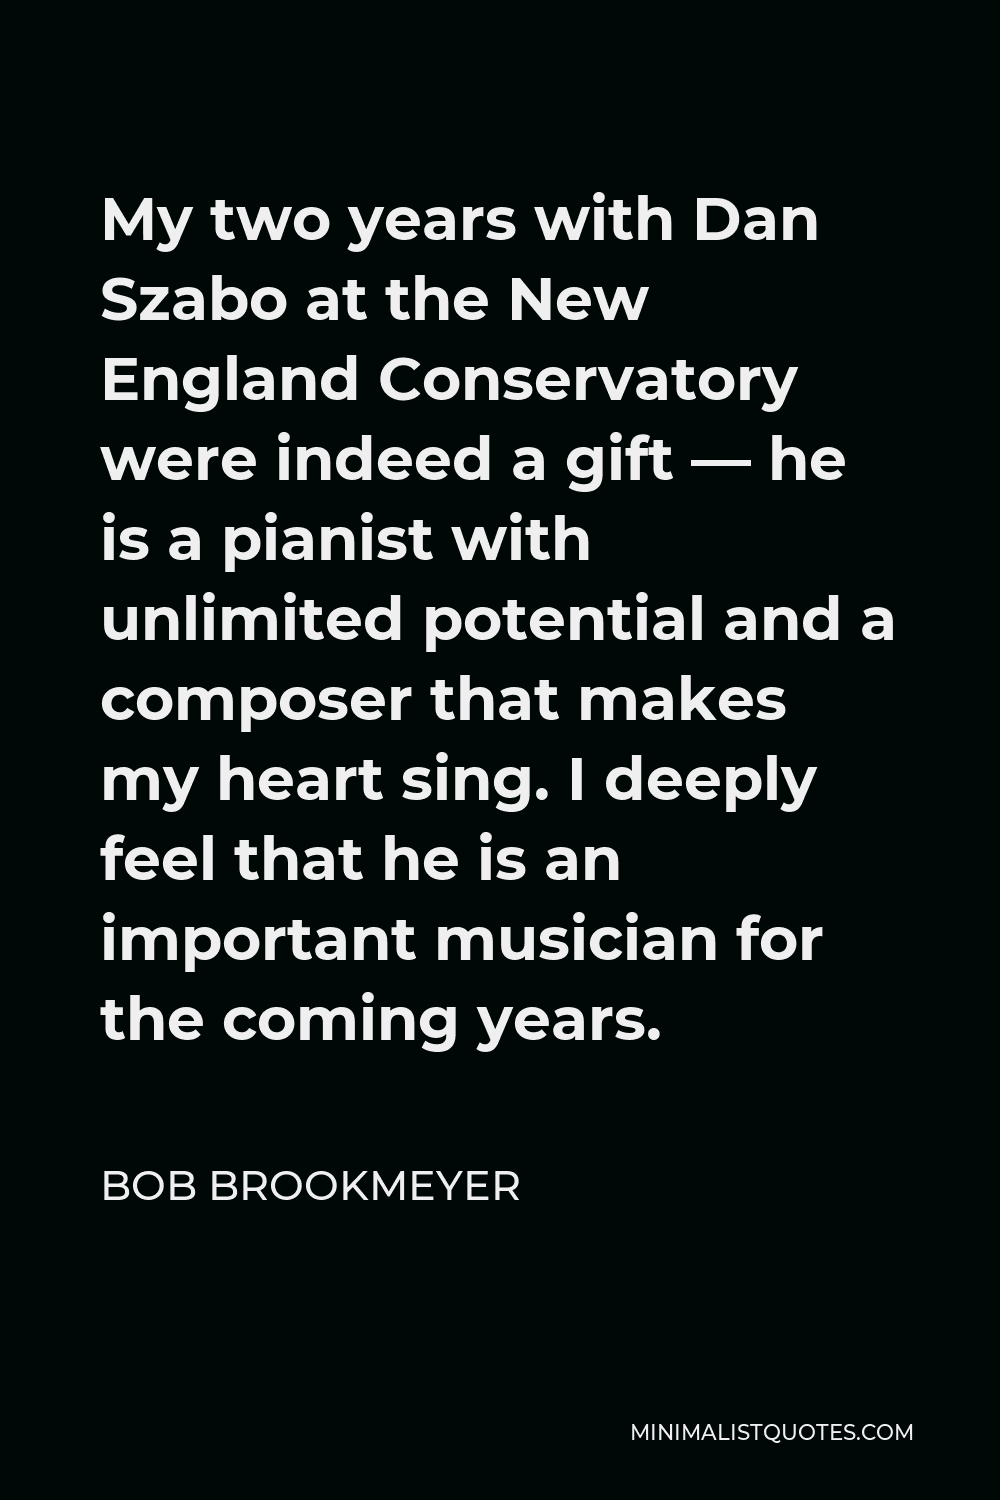 Bob Brookmeyer Quote - My two years with Dan Szabo at the New England Conservatory were indeed a gift — he is a pianist with unlimited potential and a composer that makes my heart sing. I deeply feel that he is an important musician for the coming years.